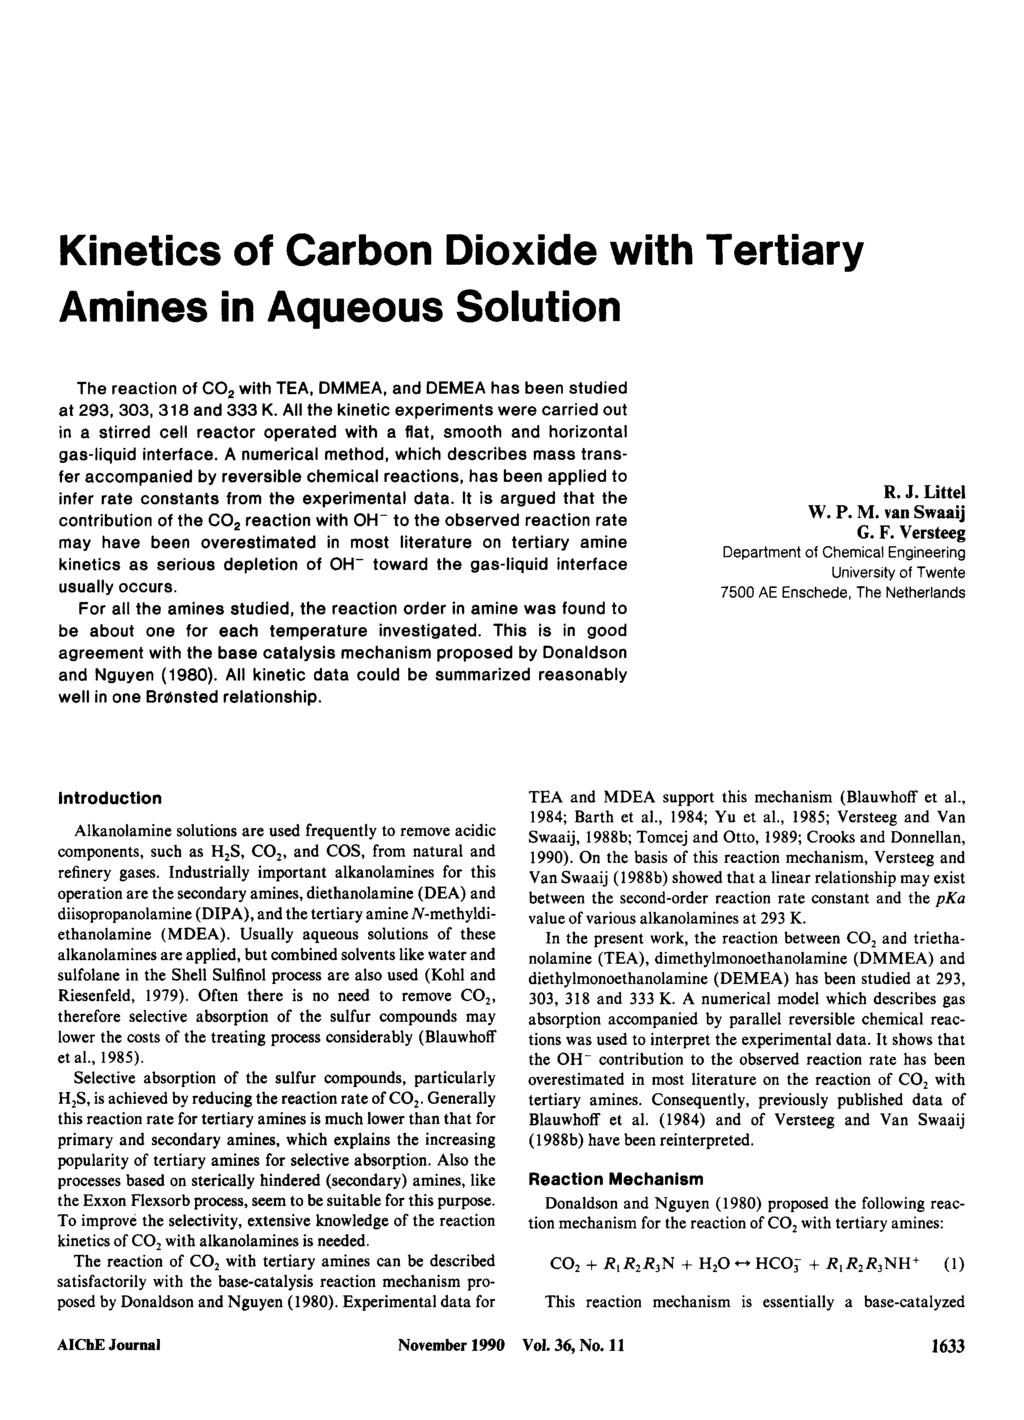 Kinetics of Carbon Dioxide with ertiary Amines in Aqueous Solution he reaction of CO, with EA, DMMEA, and DEMEA has been studied at 293, 303, 38 and 333 K.